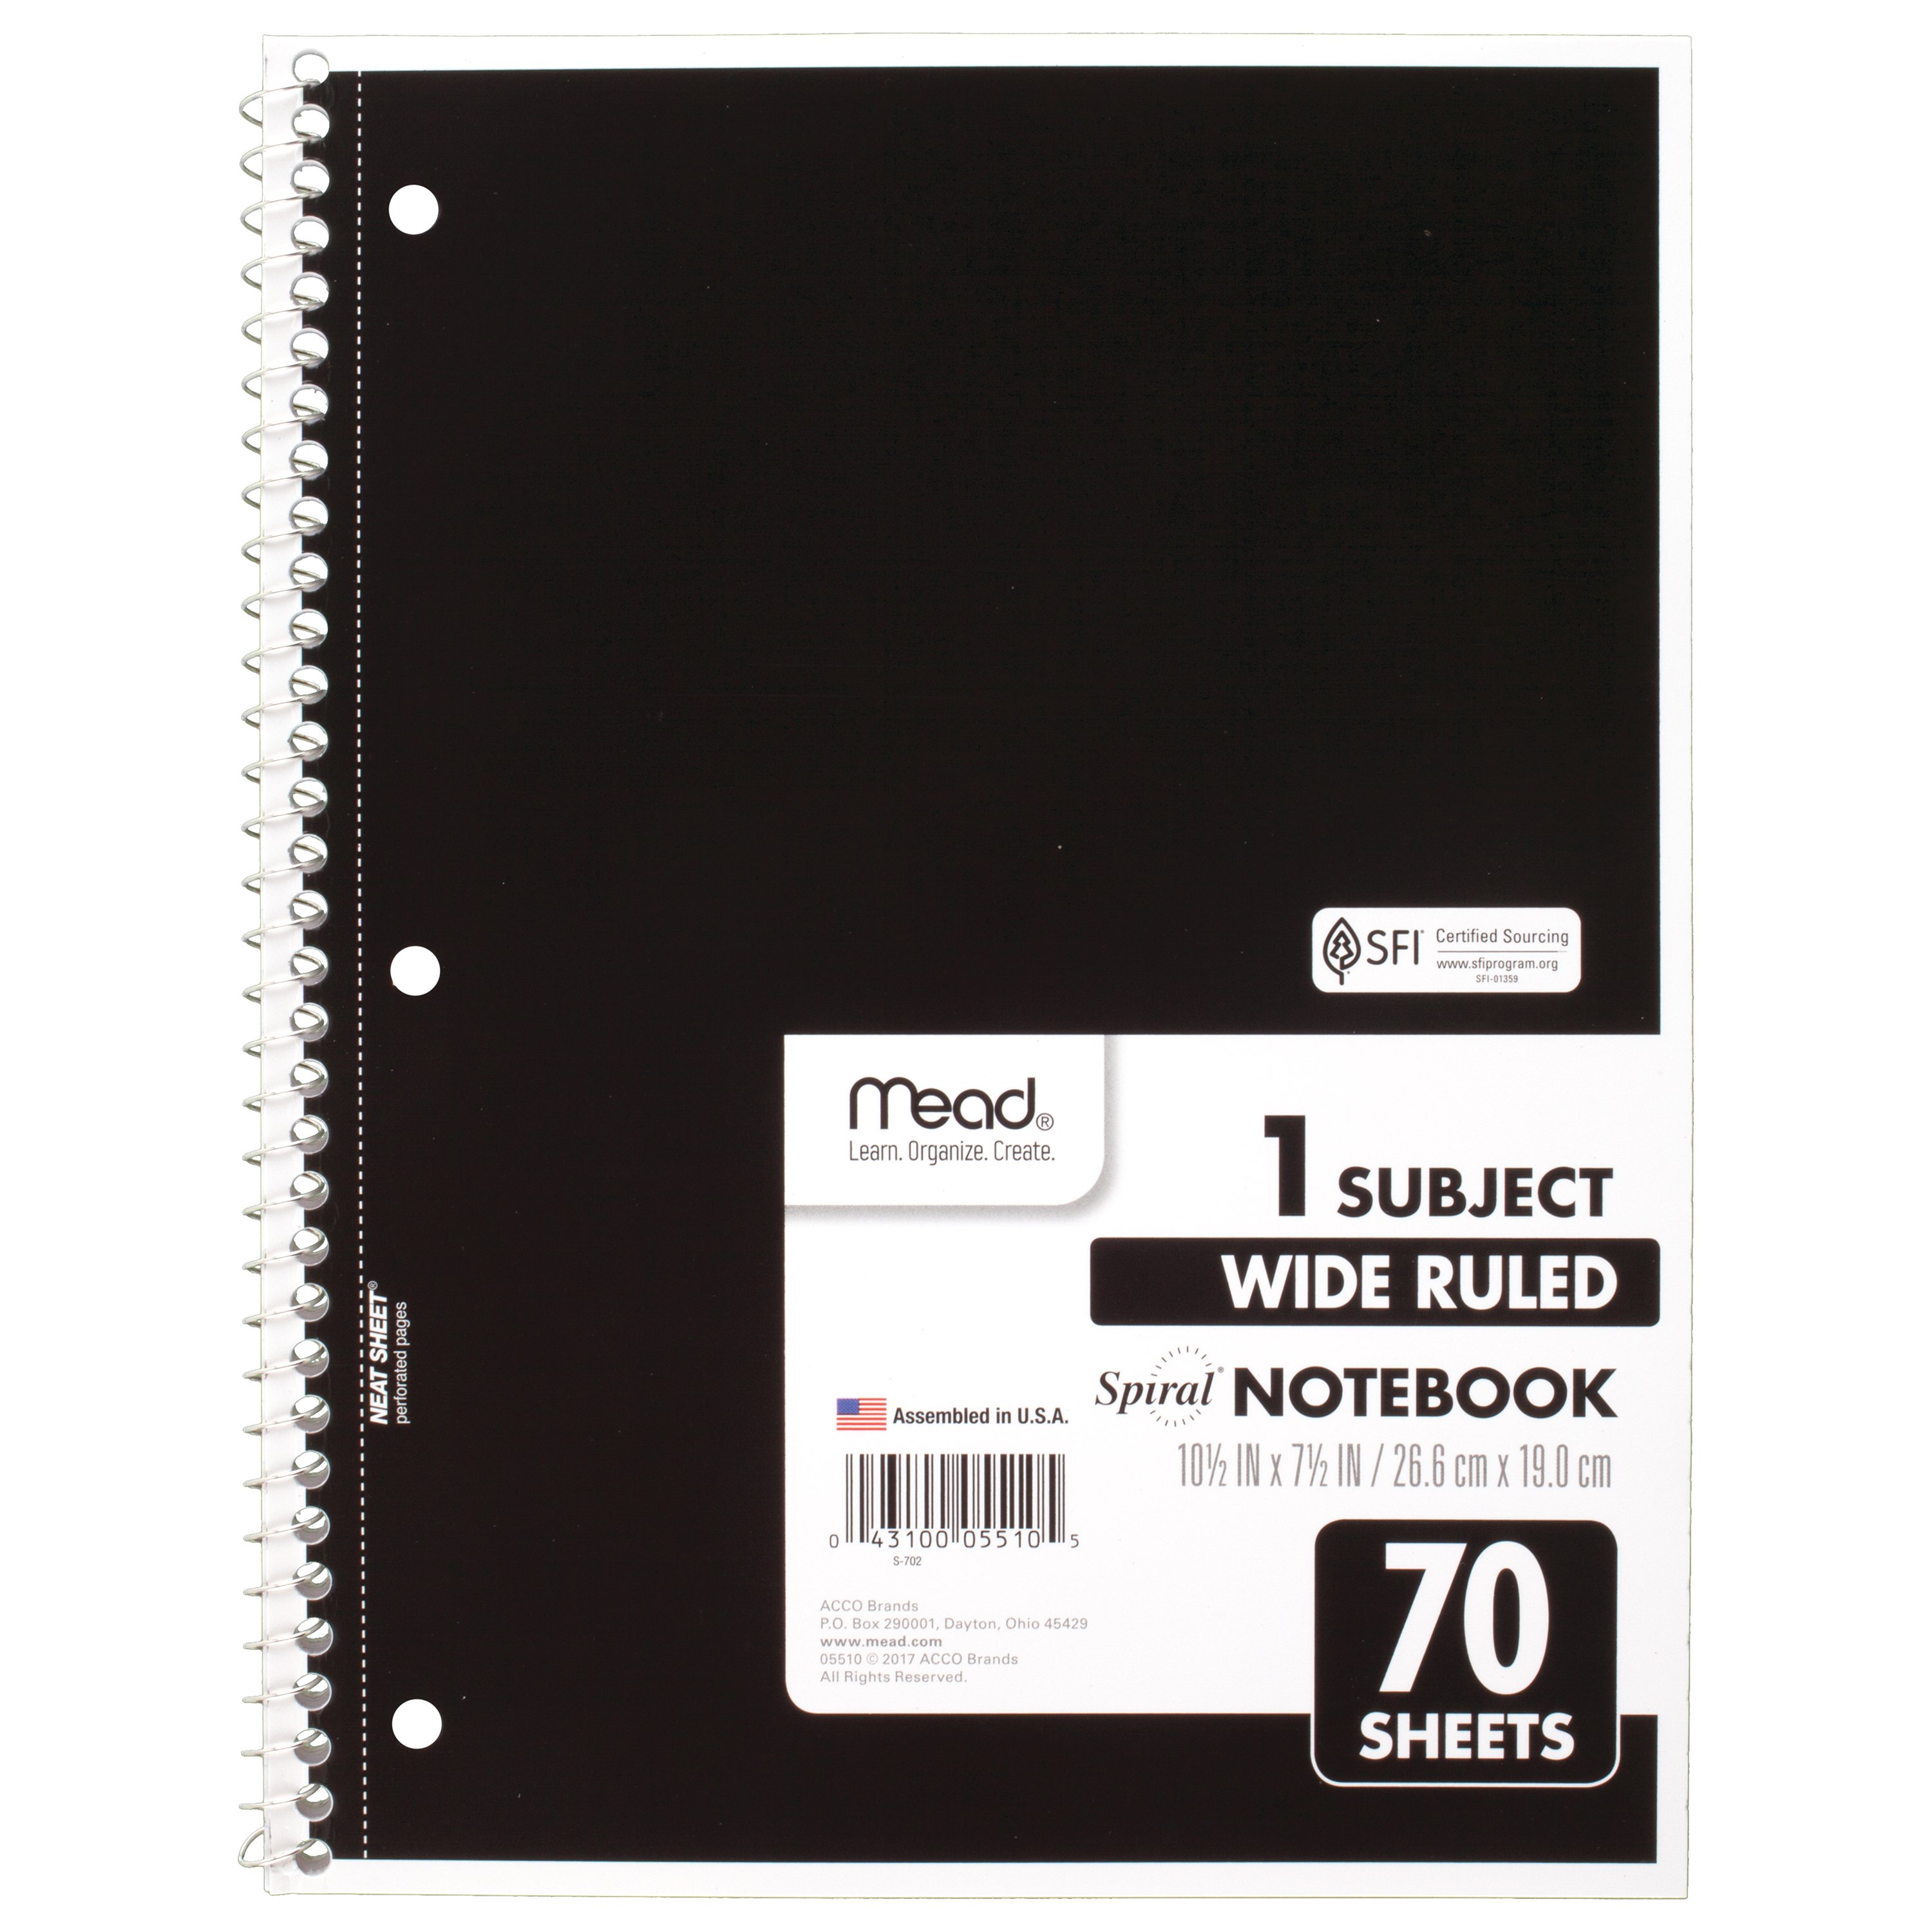 Mead Spiral 1 Subject Wide Ruled Notebook 6 Pack, Assorted Colors (73063) - image 2 of 8